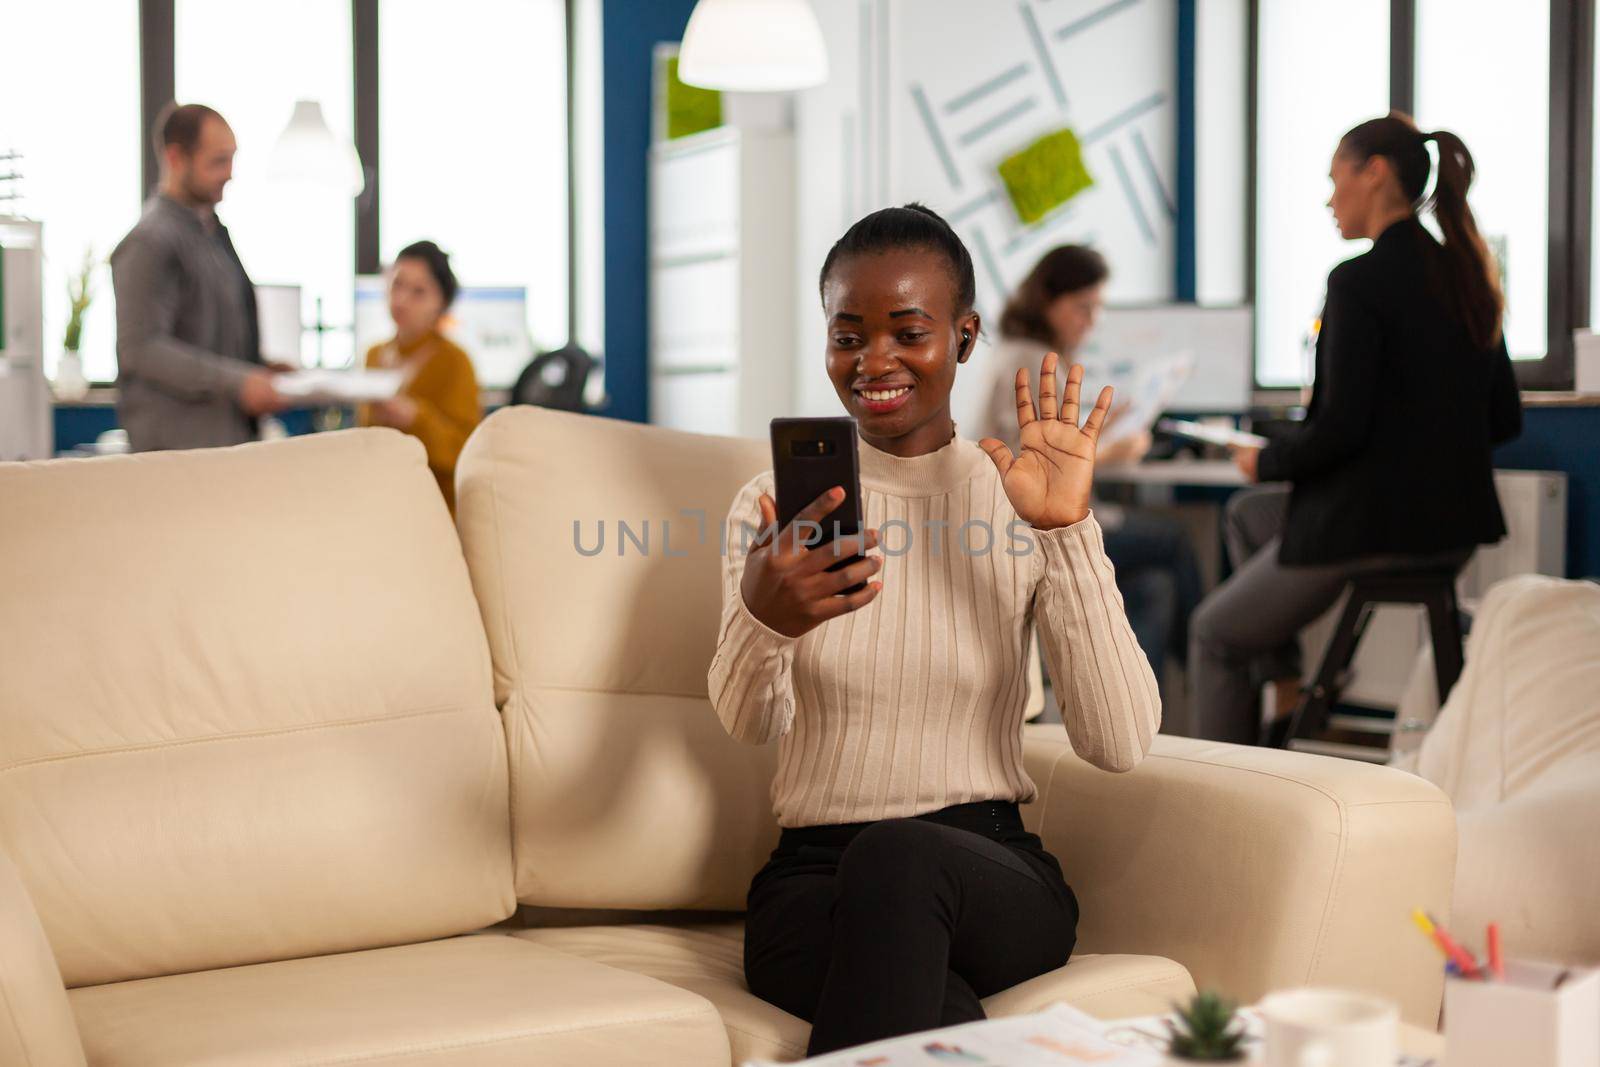 Black woman waving at camera explaining financial reports to remote manager on video call holding smartphone using headphones sitting on couch. Diverse coworkers planning financial project